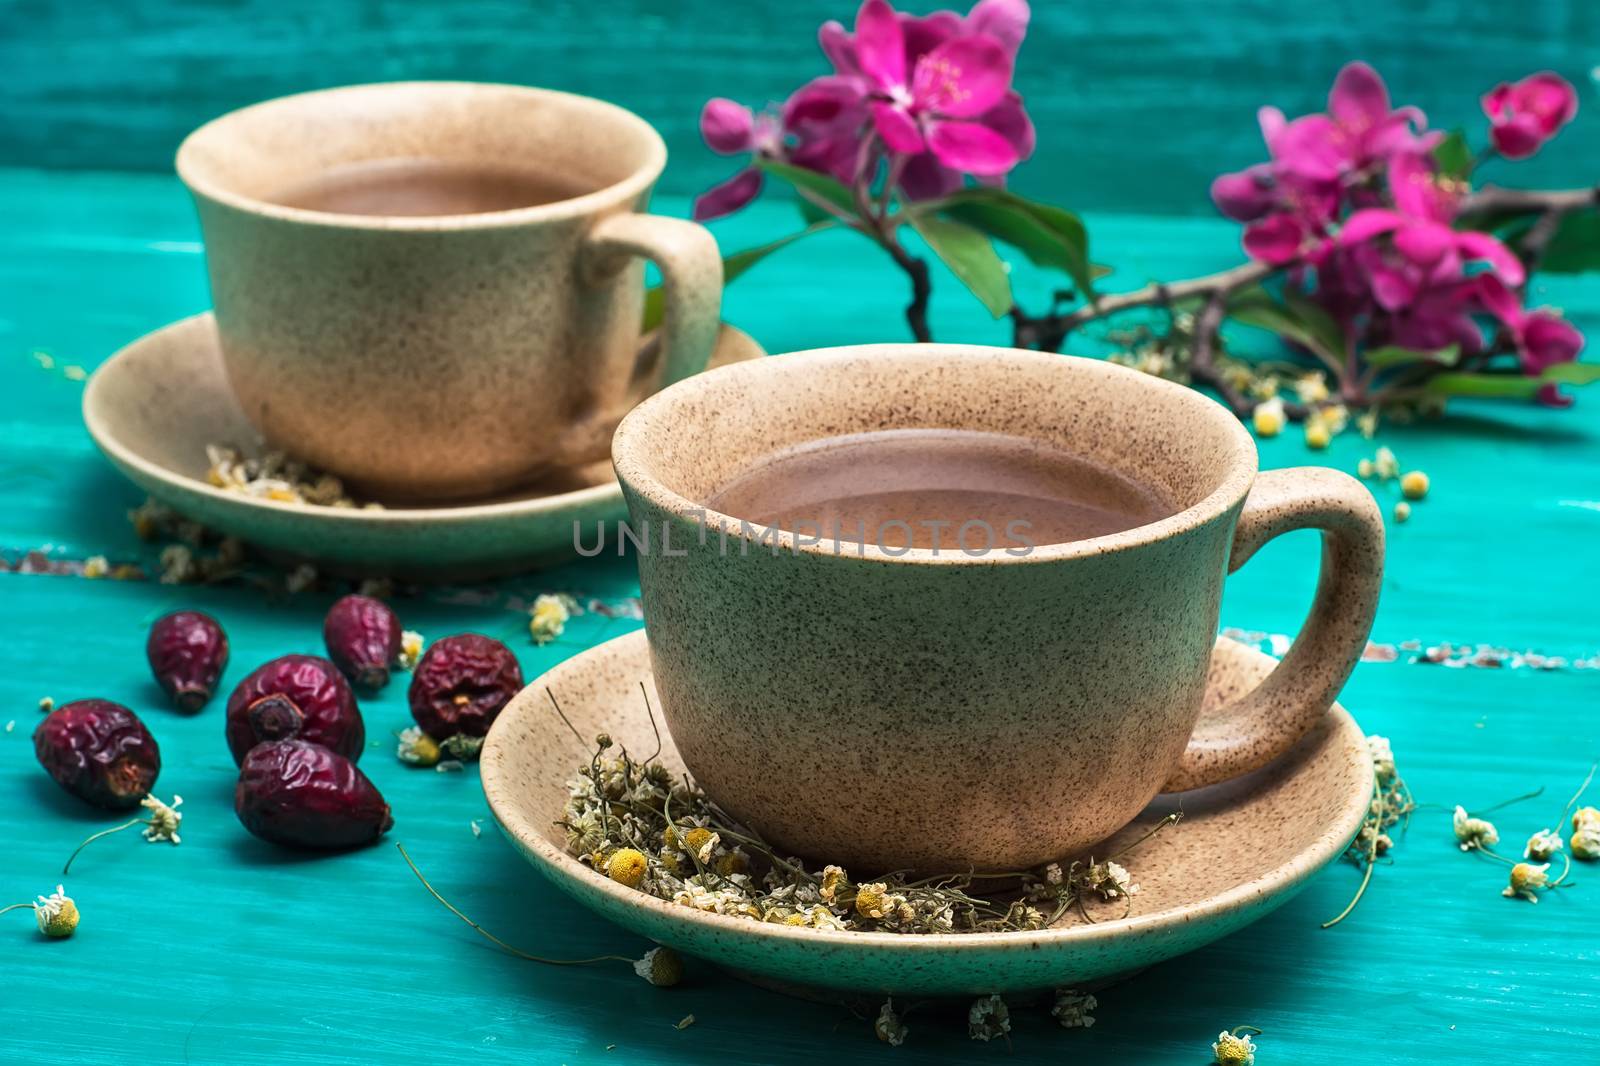 fragrant tea brewed with chamomile in ceramic mugs amid blossoming branch.Selective focus